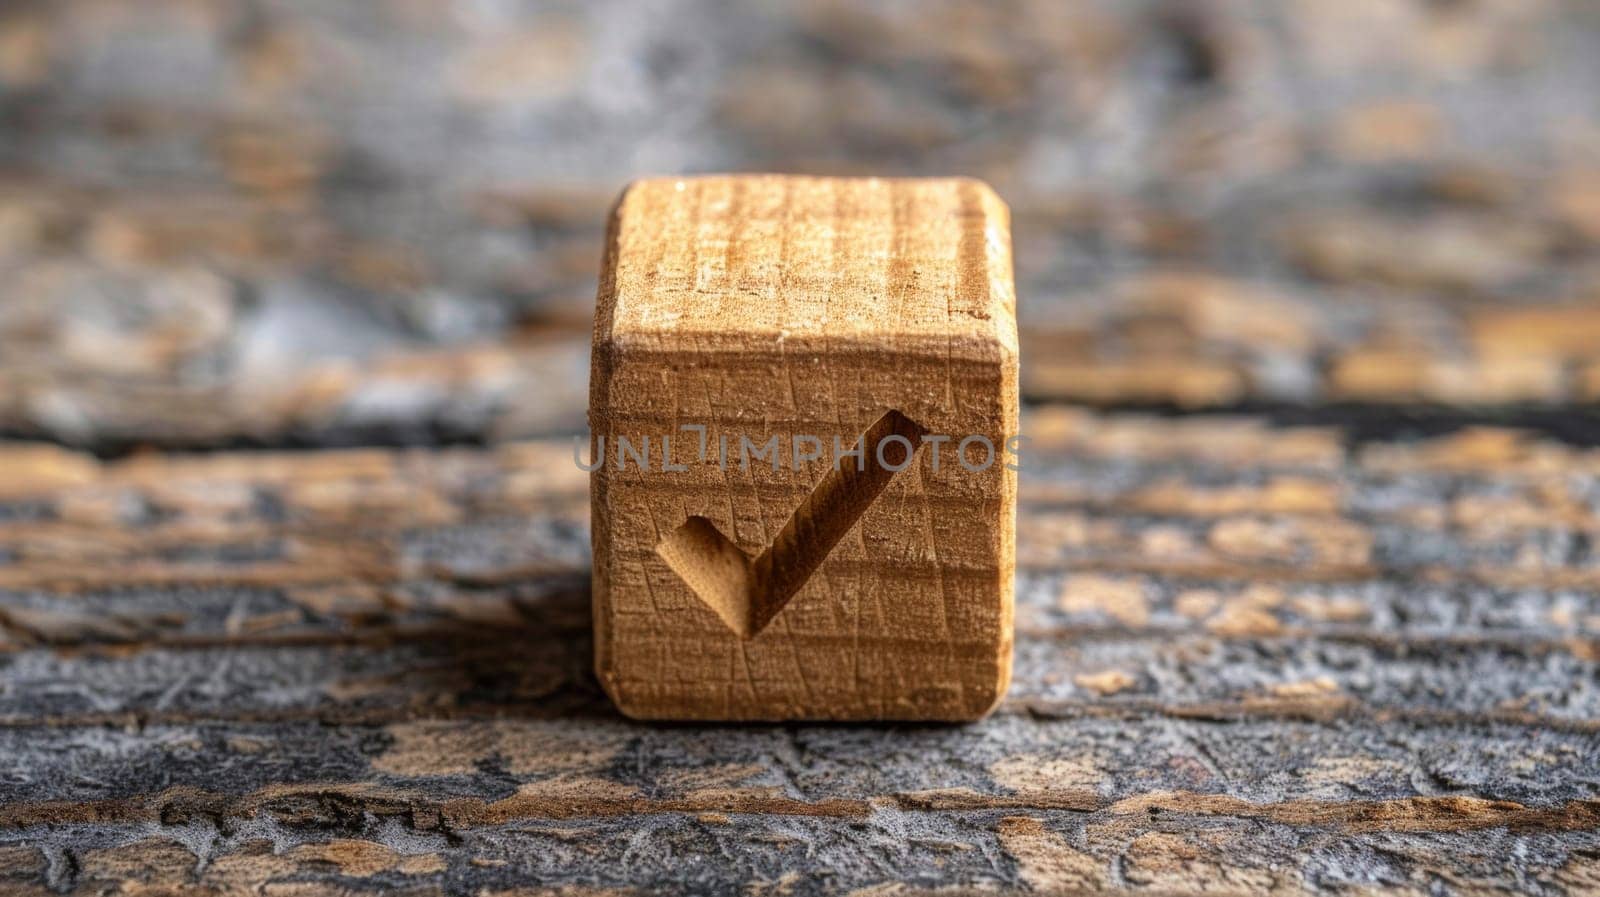 A wooden block with a check mark on it sitting in the dirt, AI by starush